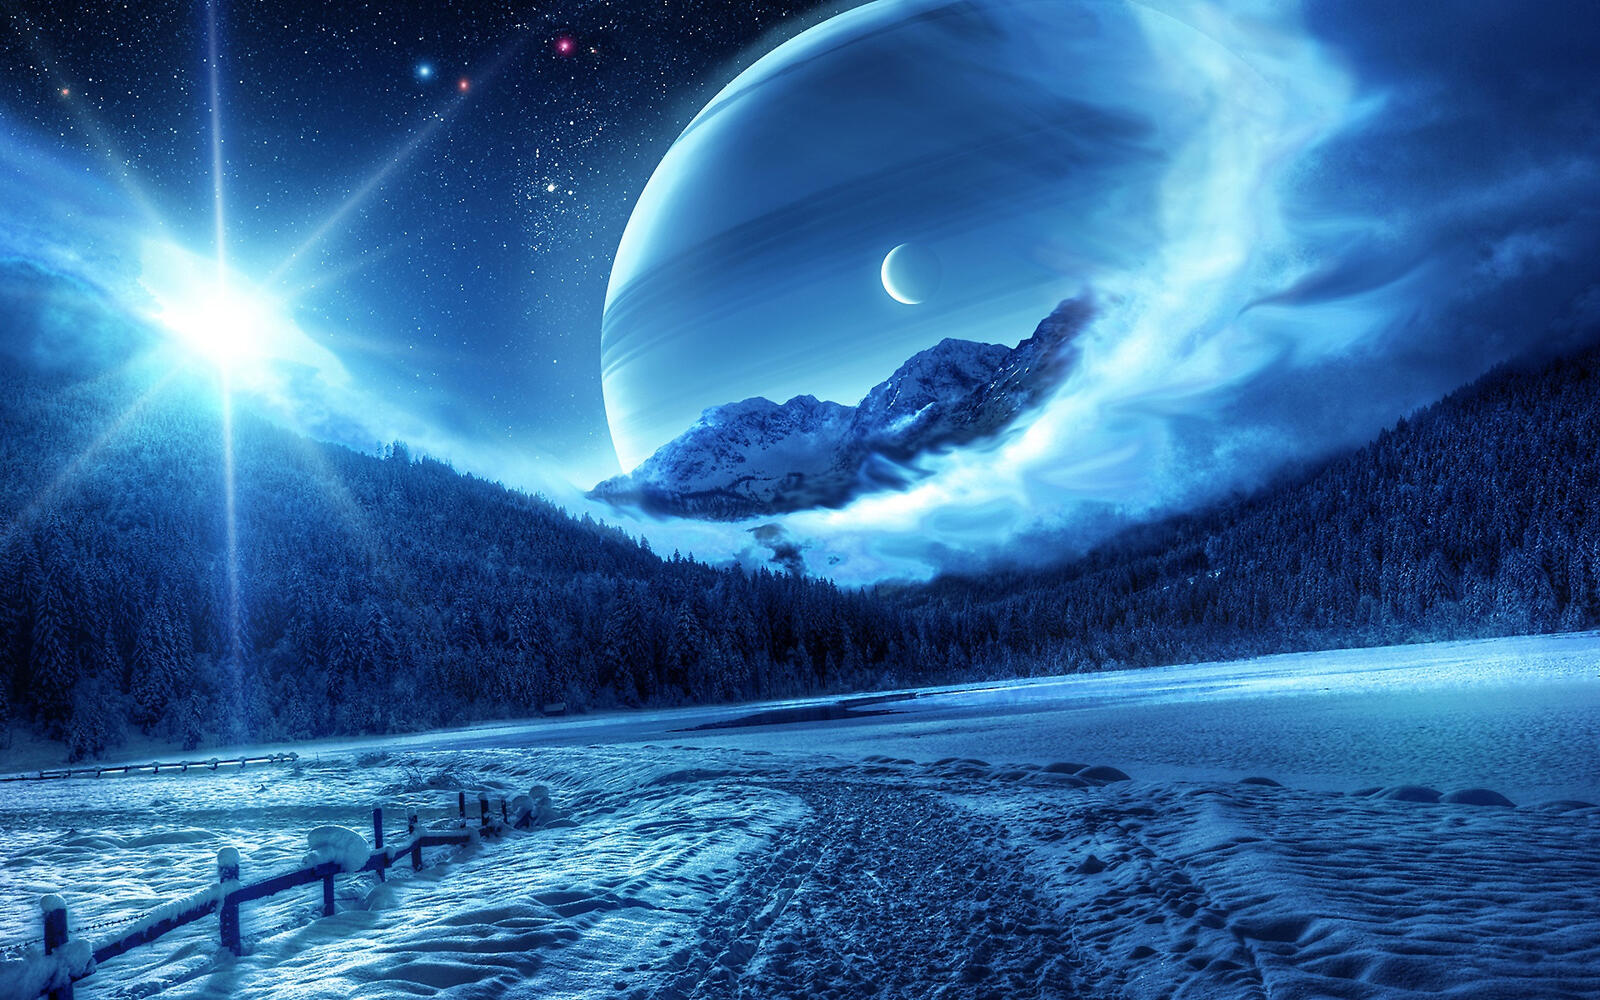 Wallpapers shiny surface wallpaper blue planet on the desktop